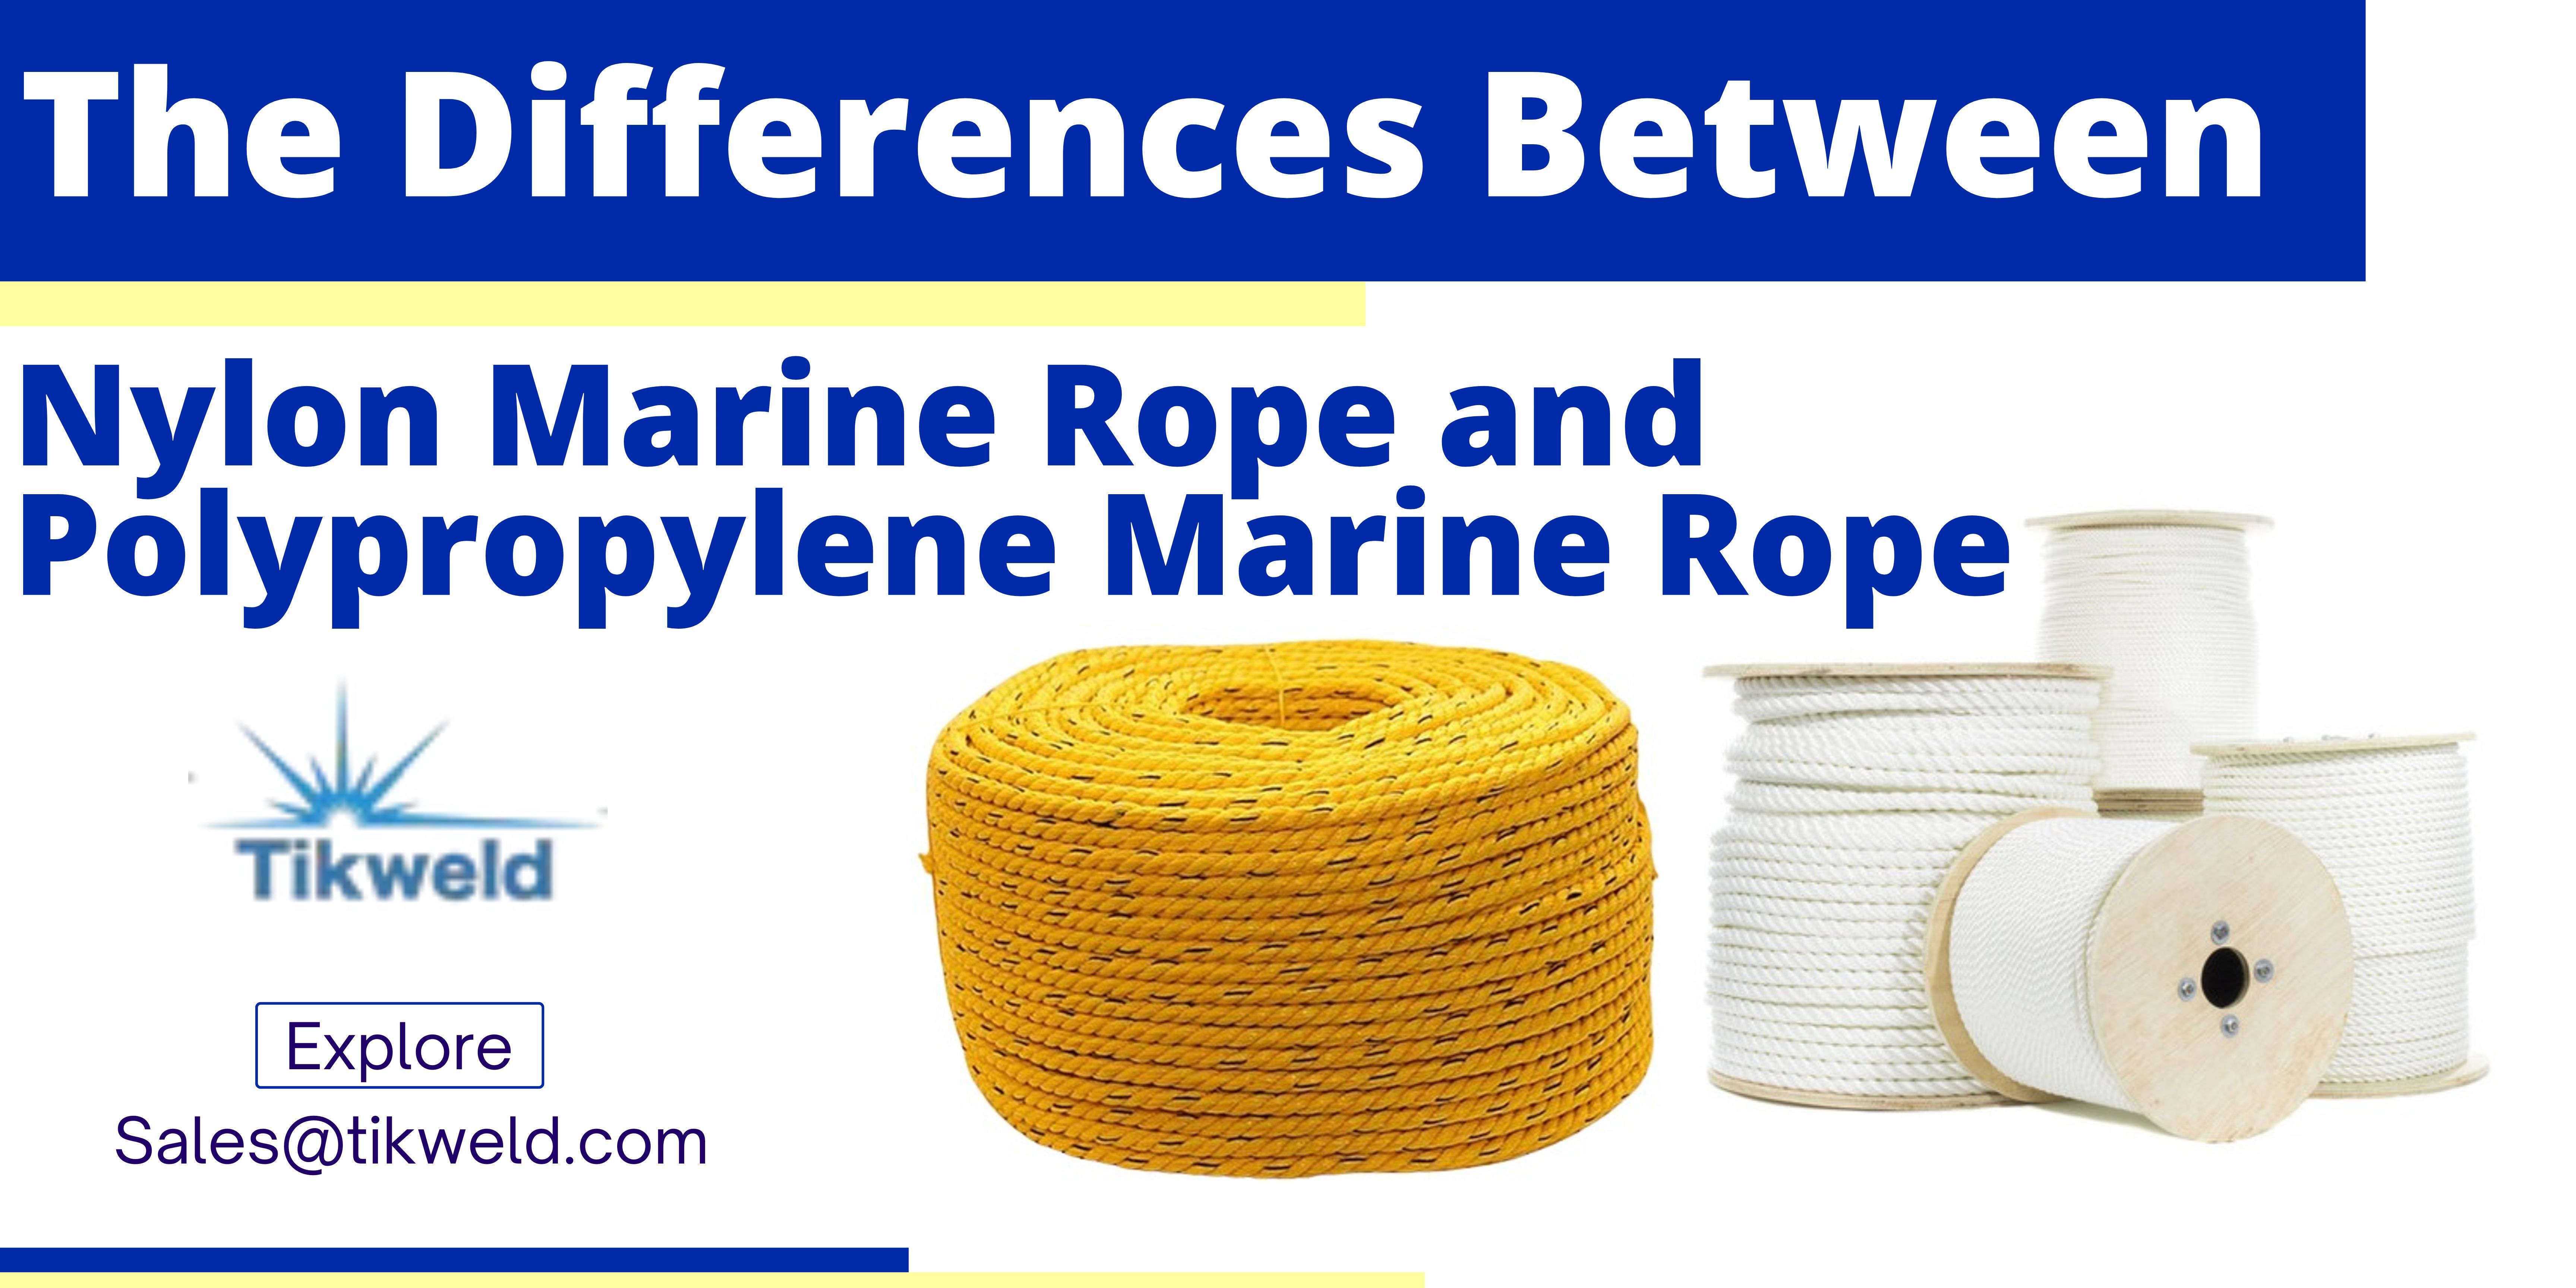 The Differences Between Nylon and Polypropylene Marine Rope